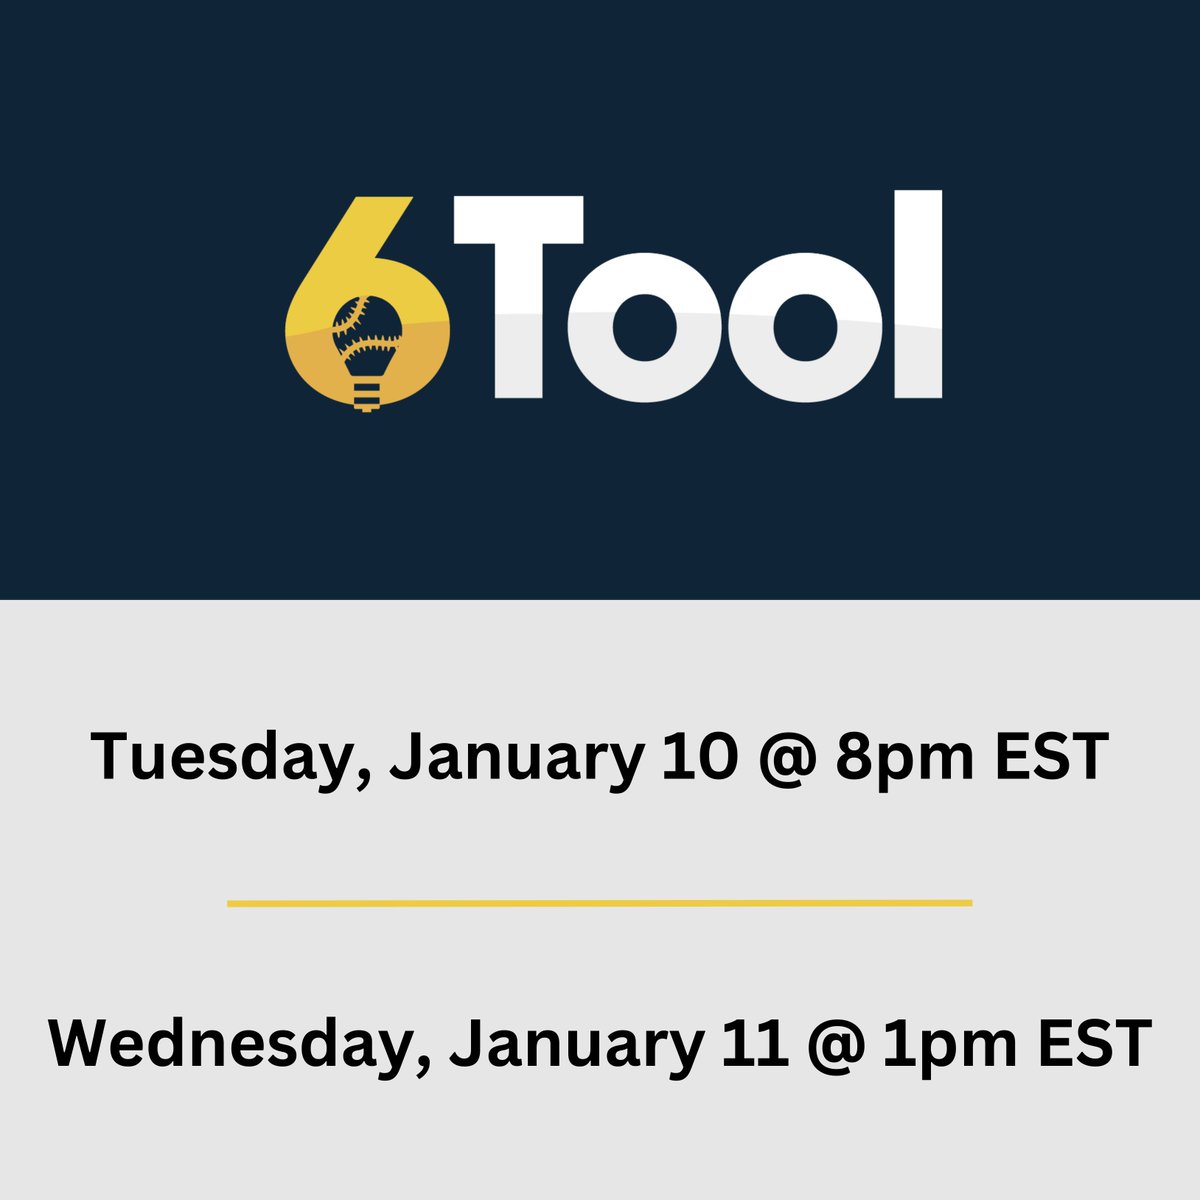 Running 2 free webinars this week to teach coaches how to create and administer quizzes for their teams on 6-Tool. Don't miss your chance to help develop your team's baseball IQ! DM us to sign up for a session.

#baseballIQ #baseballcoaching #6Tool